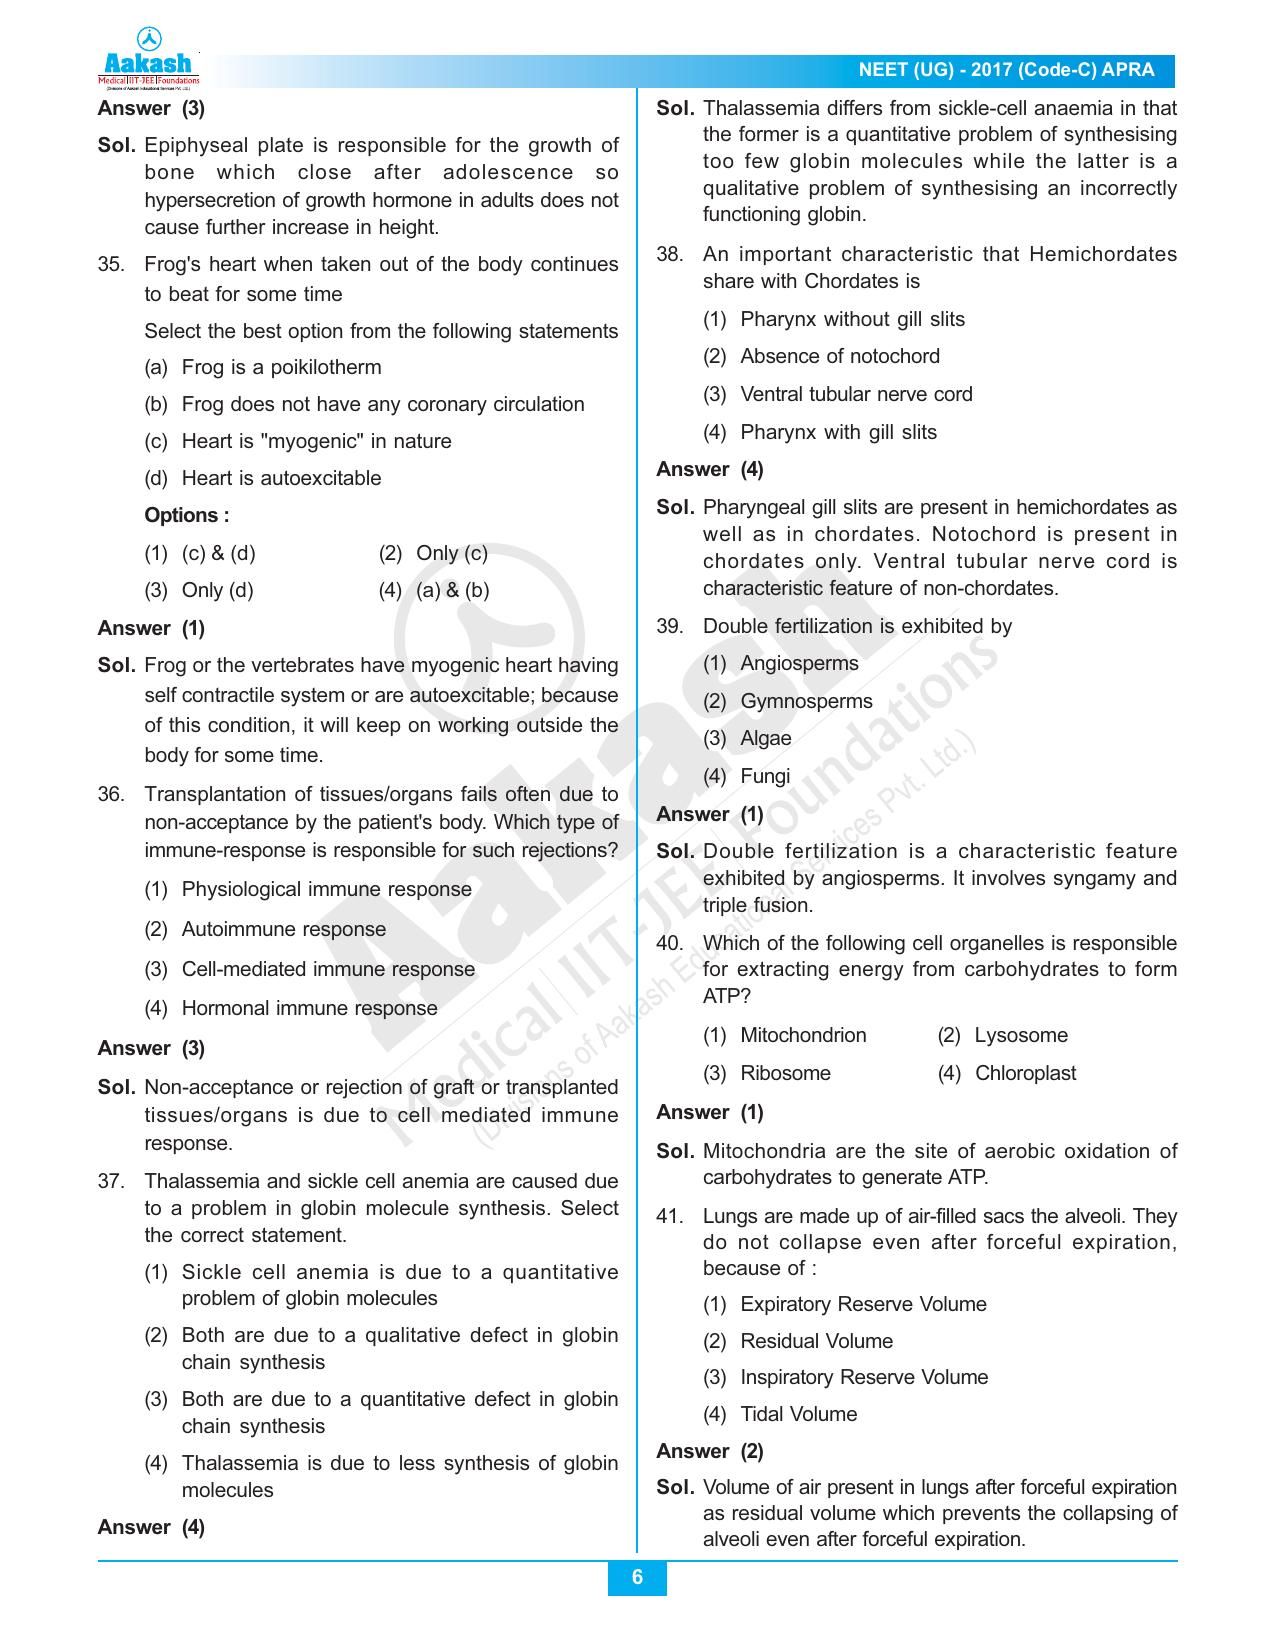  NEET Code C 2017 Answer & Solutions - Page 6